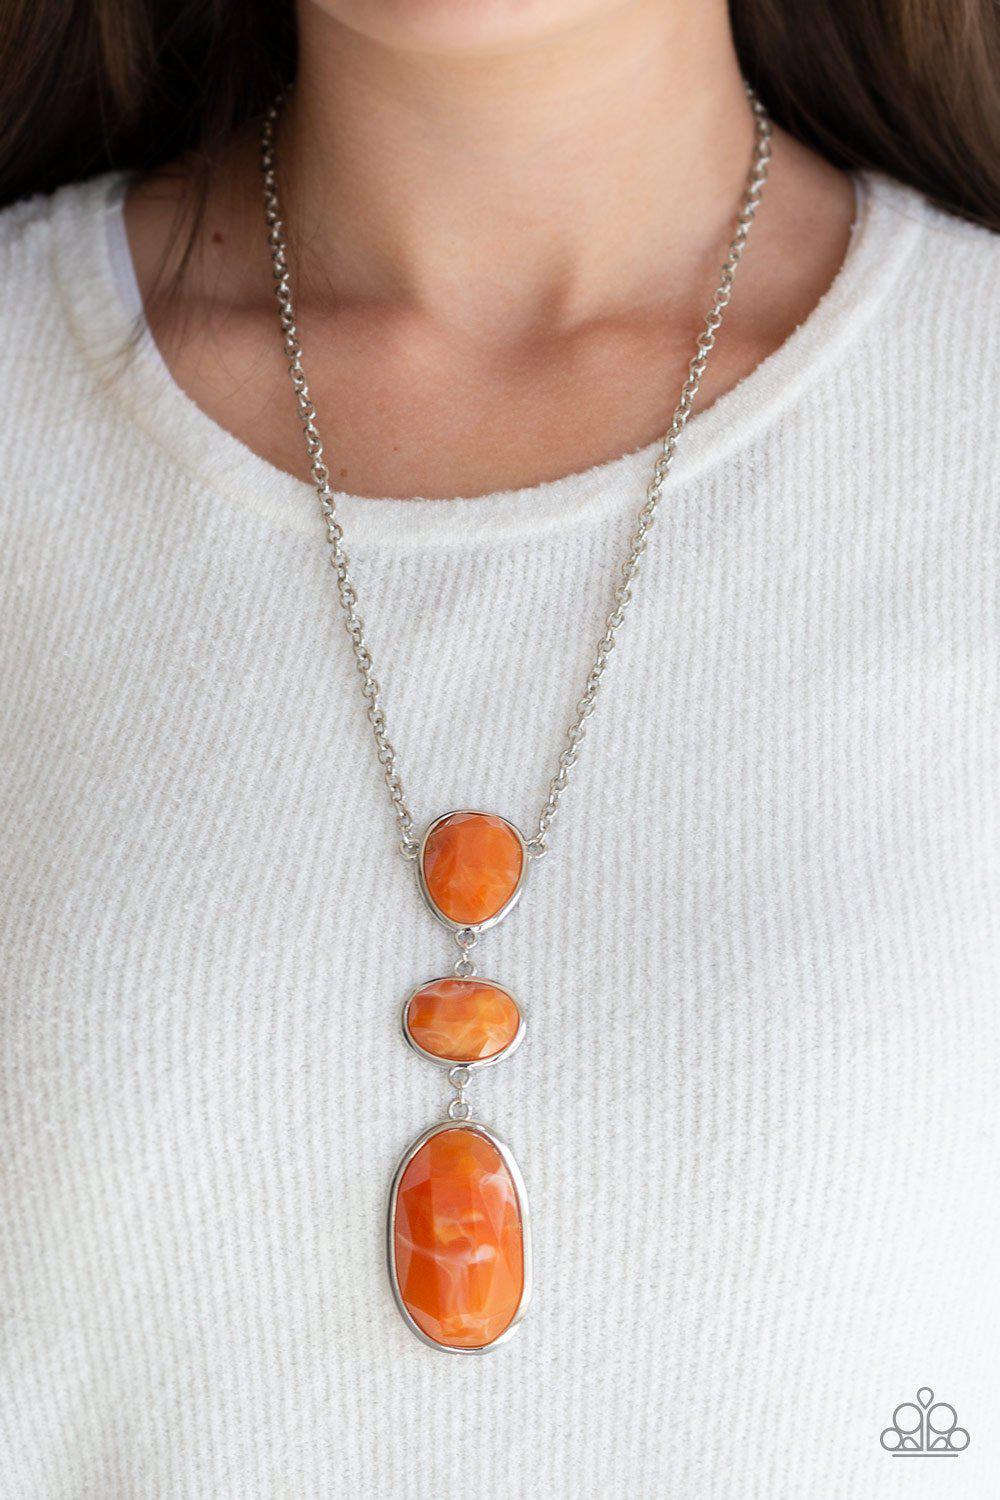 Making an Impact Orange Acrylic Necklace - Paparazzi Accessories-CarasShop.com - $5 Jewelry by Cara Jewels